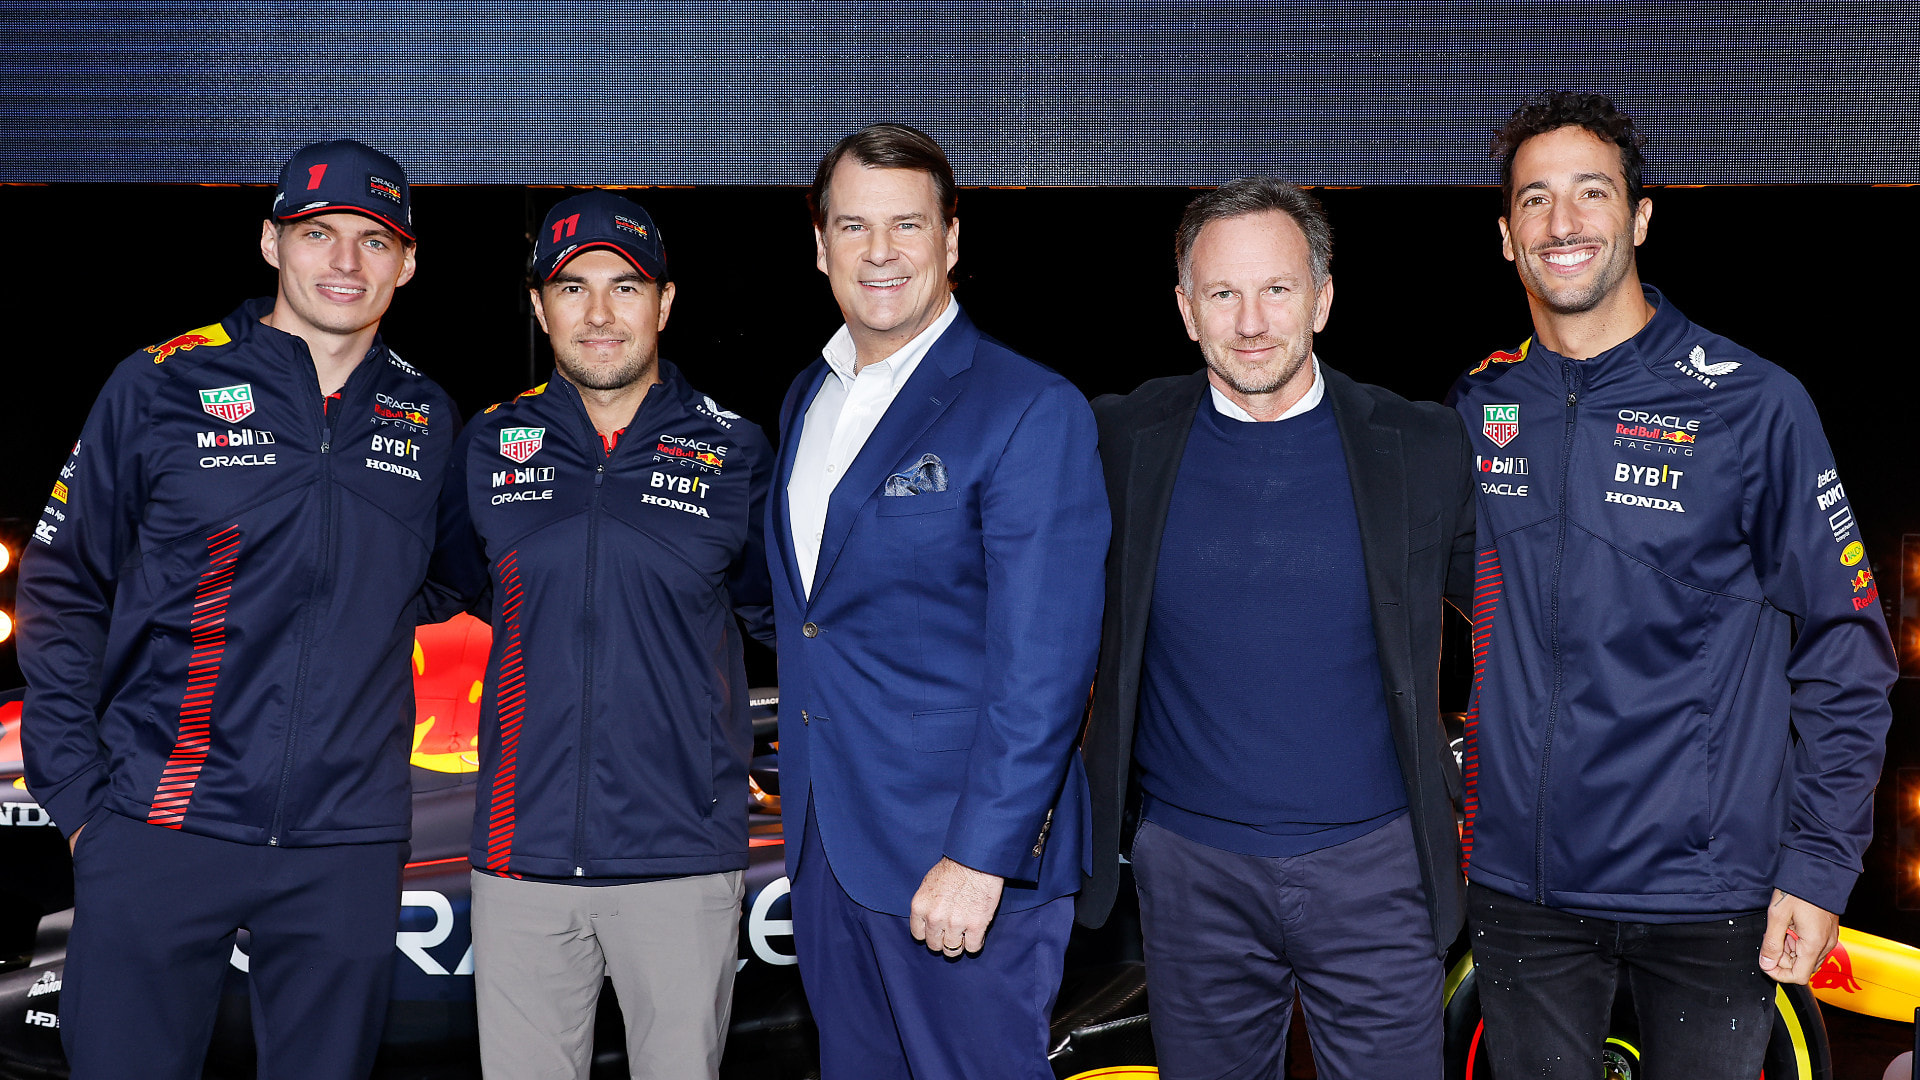 Horner elaborates on the reasons behind Red Bull's partnership with Ford And, ... Tweet From Marvel